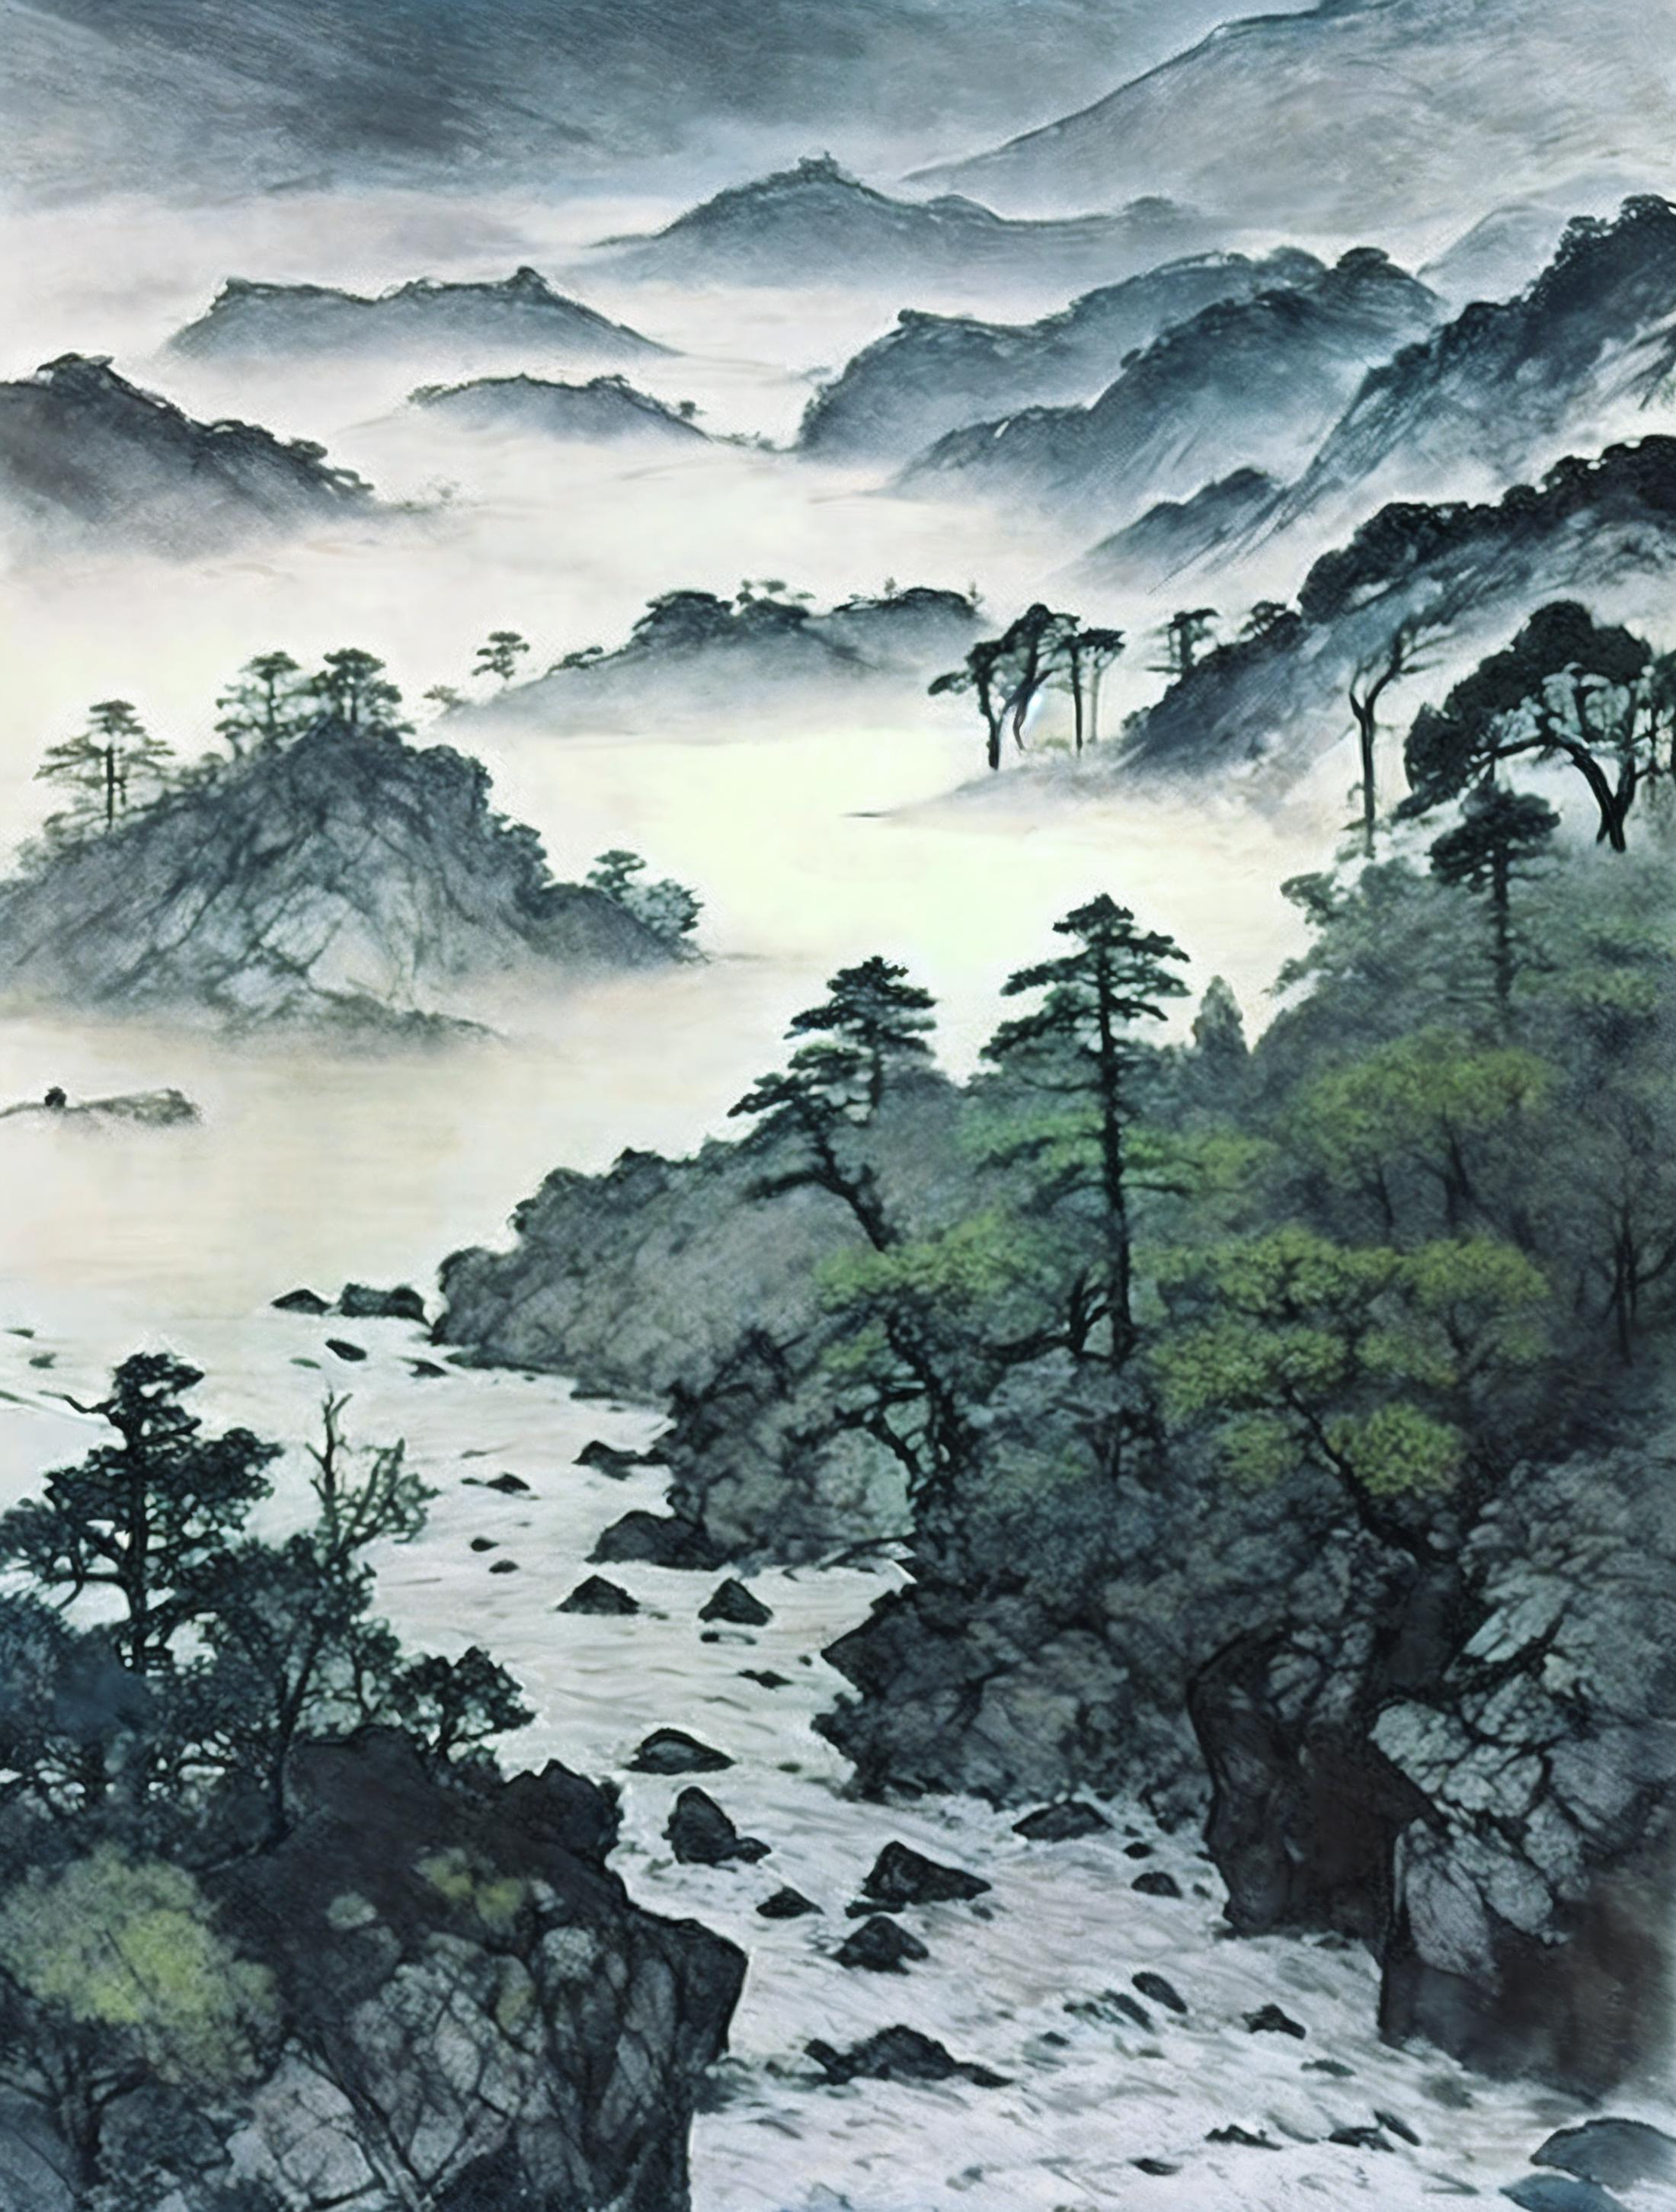 A Painting of a River Between Mountains and Trees